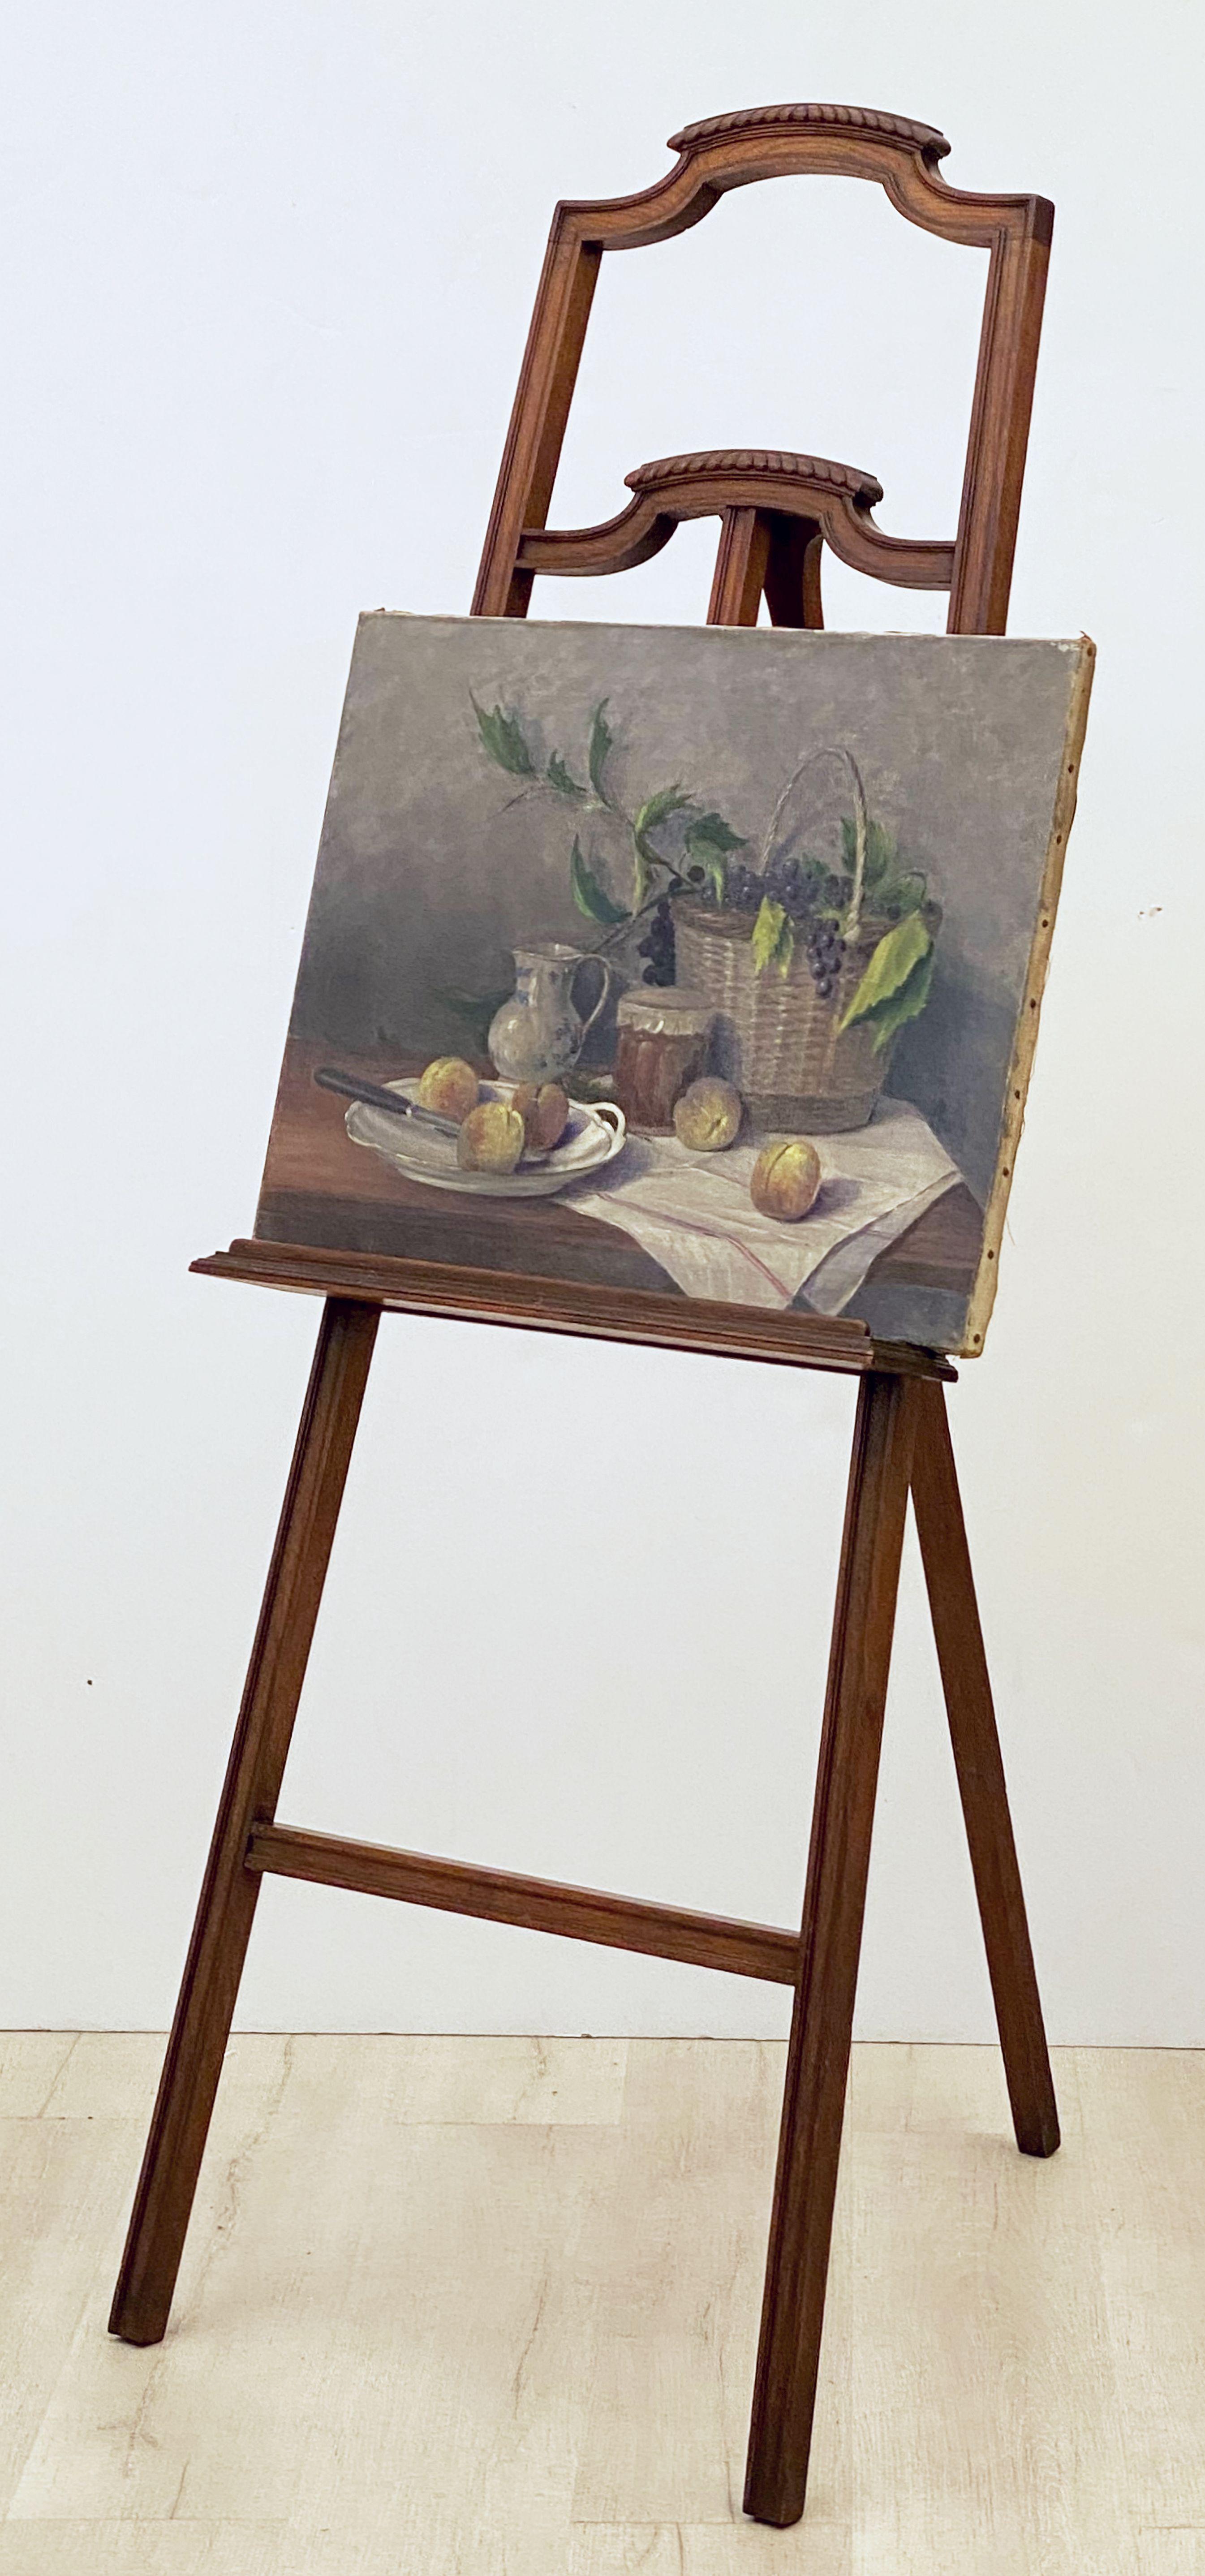 A fine English display or artist's easel, featuring a tripod stand with carved top panel, fixed gallery shelf, and wooden knobs for adjusting the height of the supports for the top of the displayed art.

Height with leg pushed in: 61 1/2